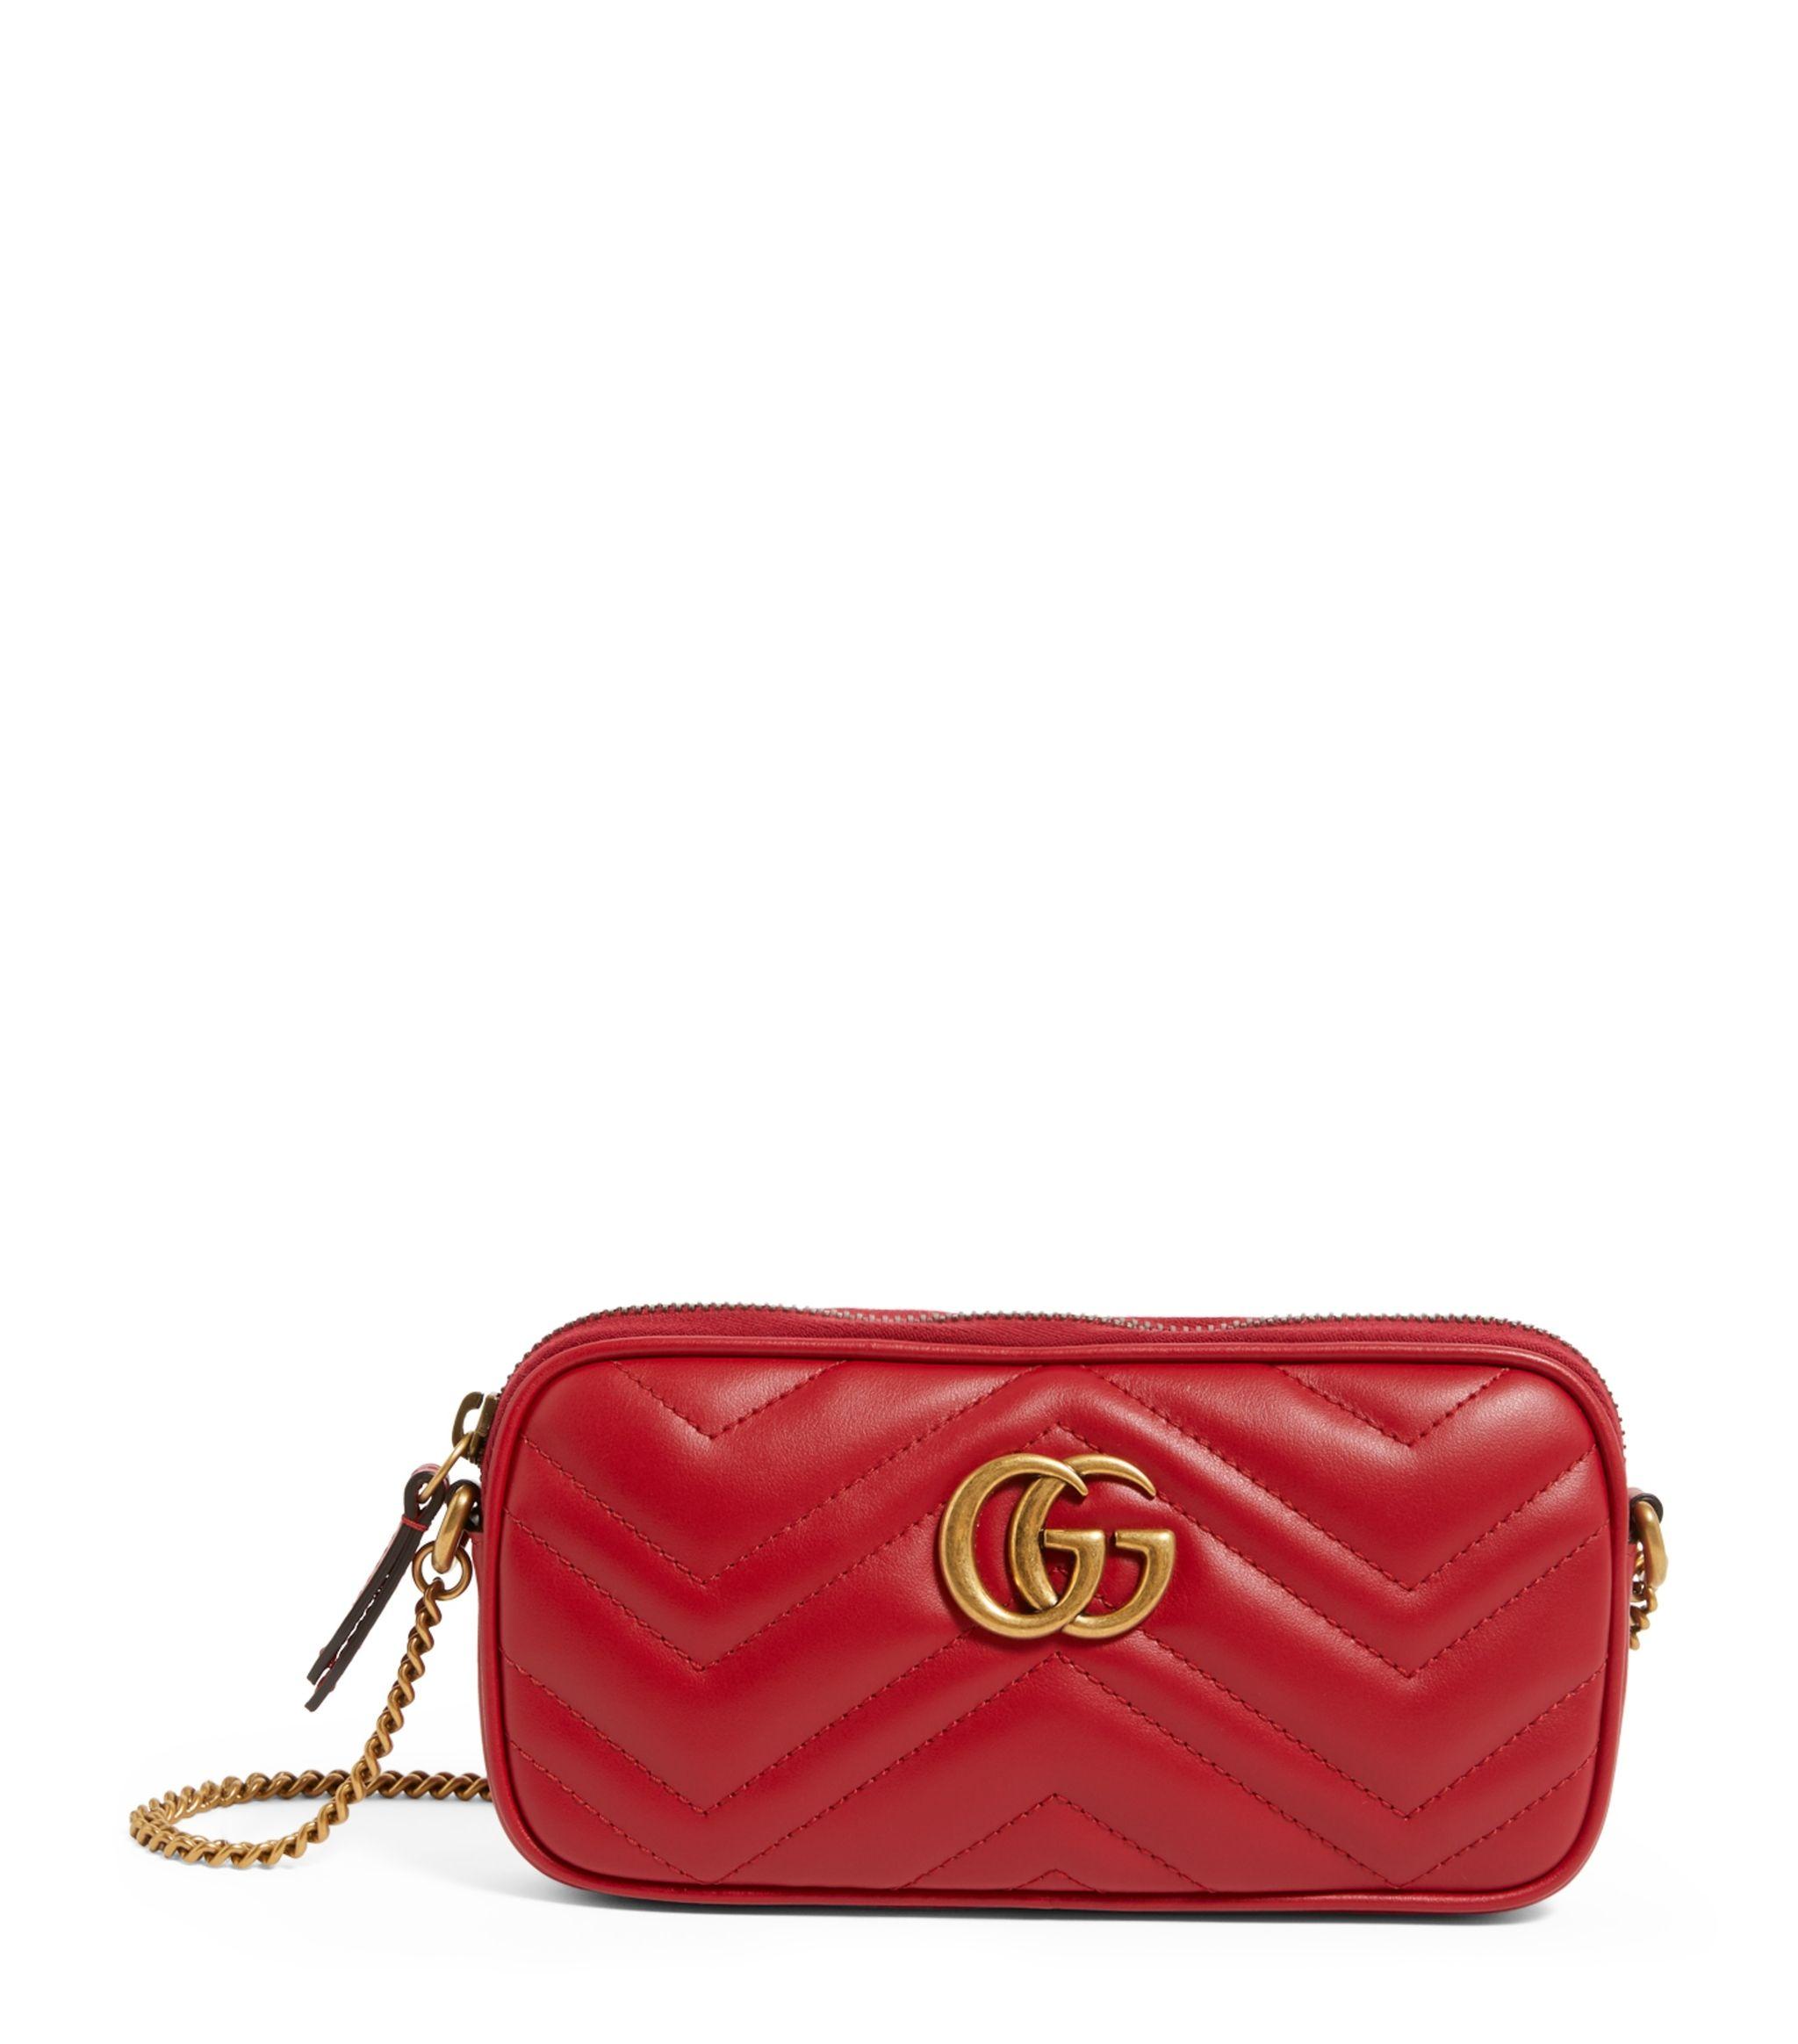 Gucci Mini Leather Marmont Chain Bag in Red - Lyst